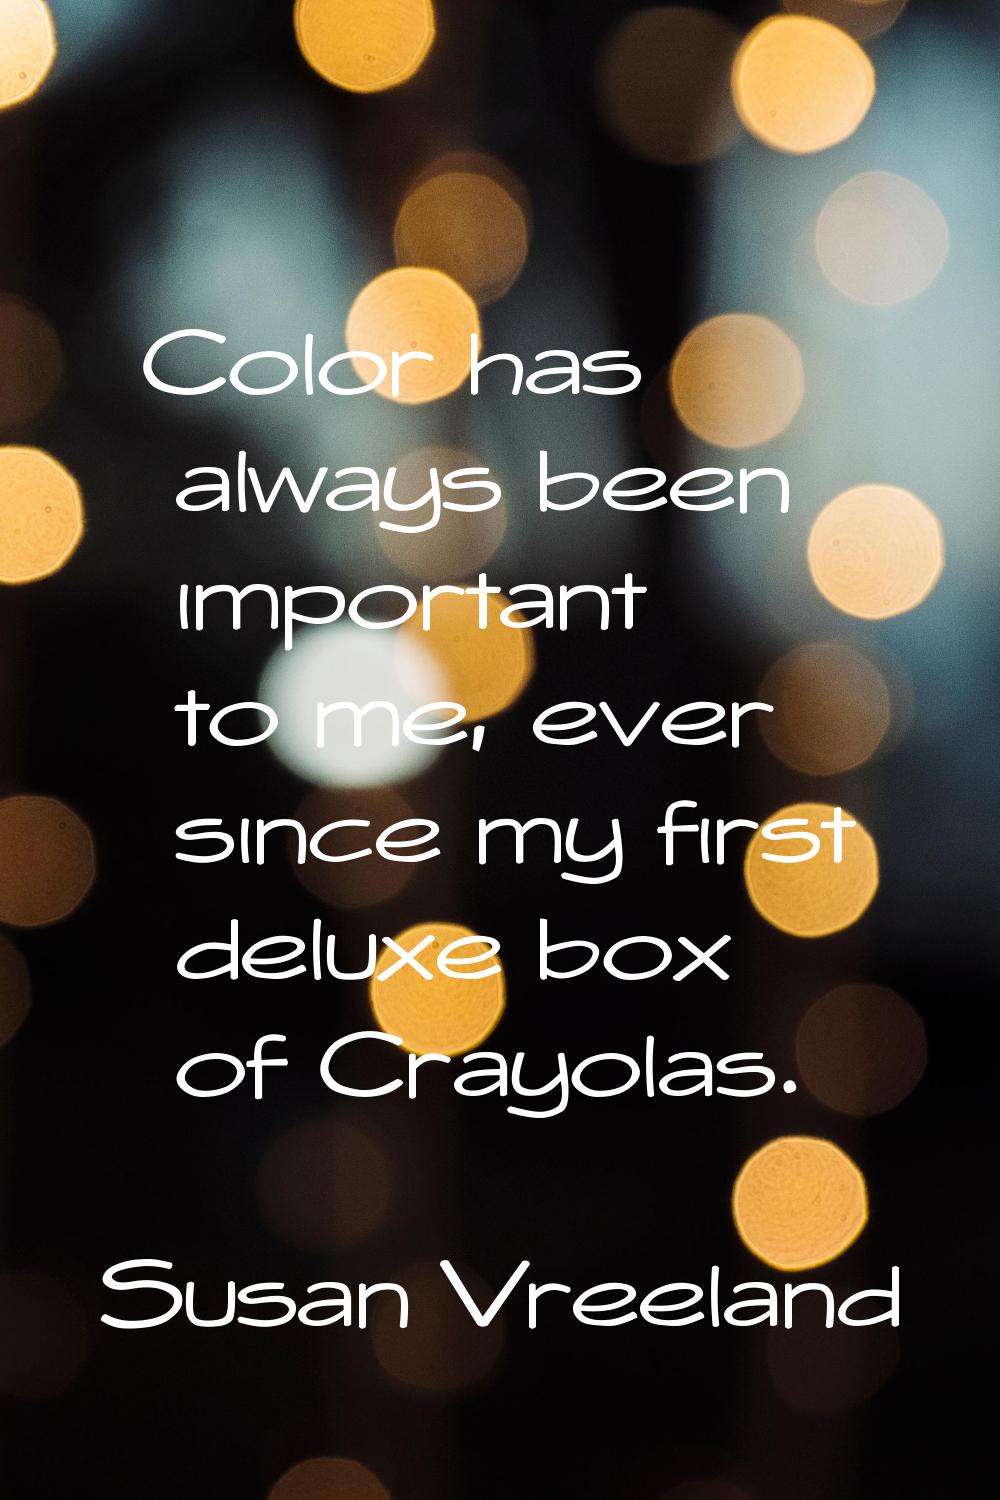 Color has always been important to me, ever since my first deluxe box of Crayolas.